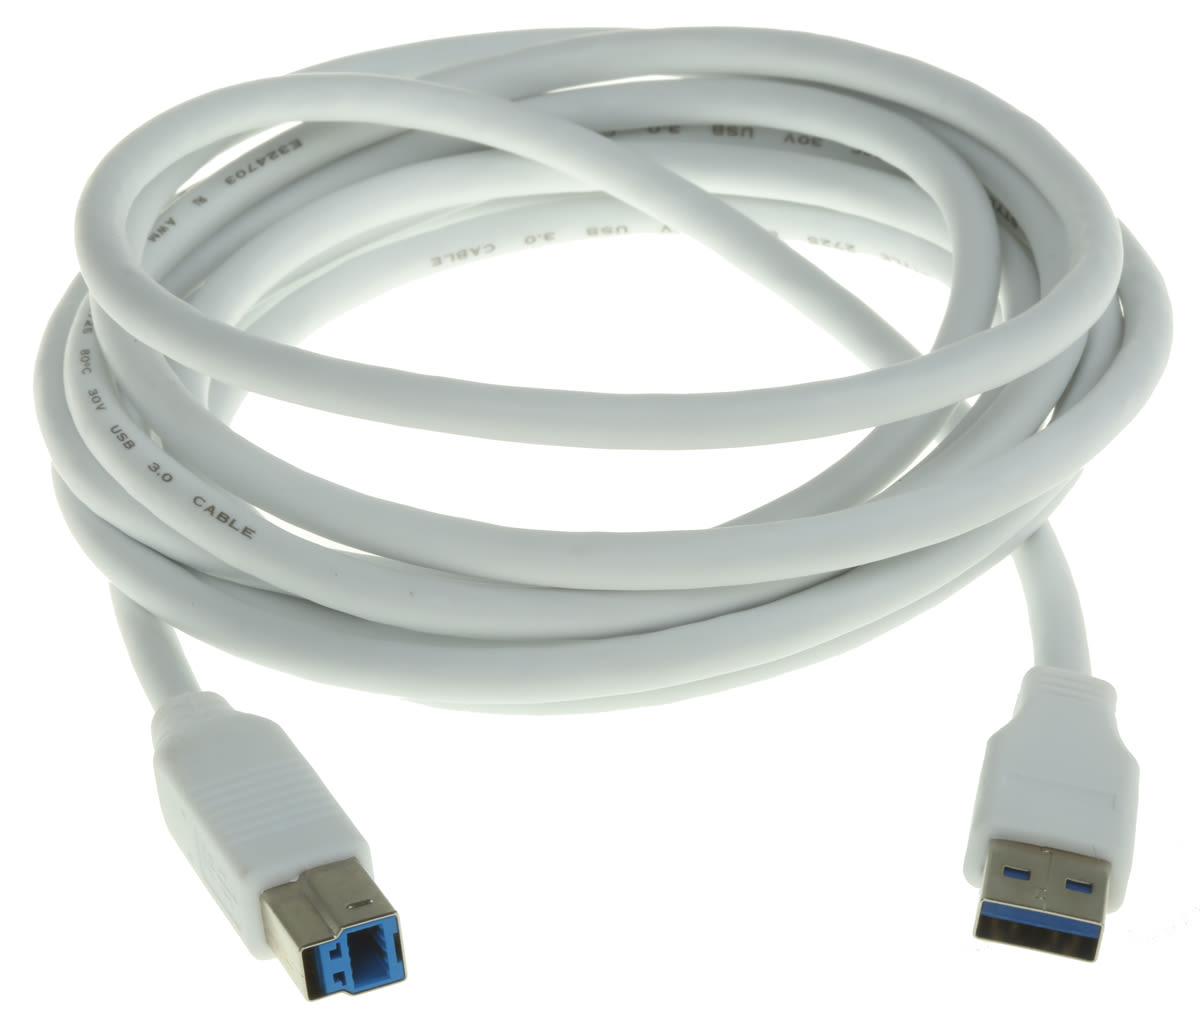 VGA Cables - A Complete Buyers' Guide